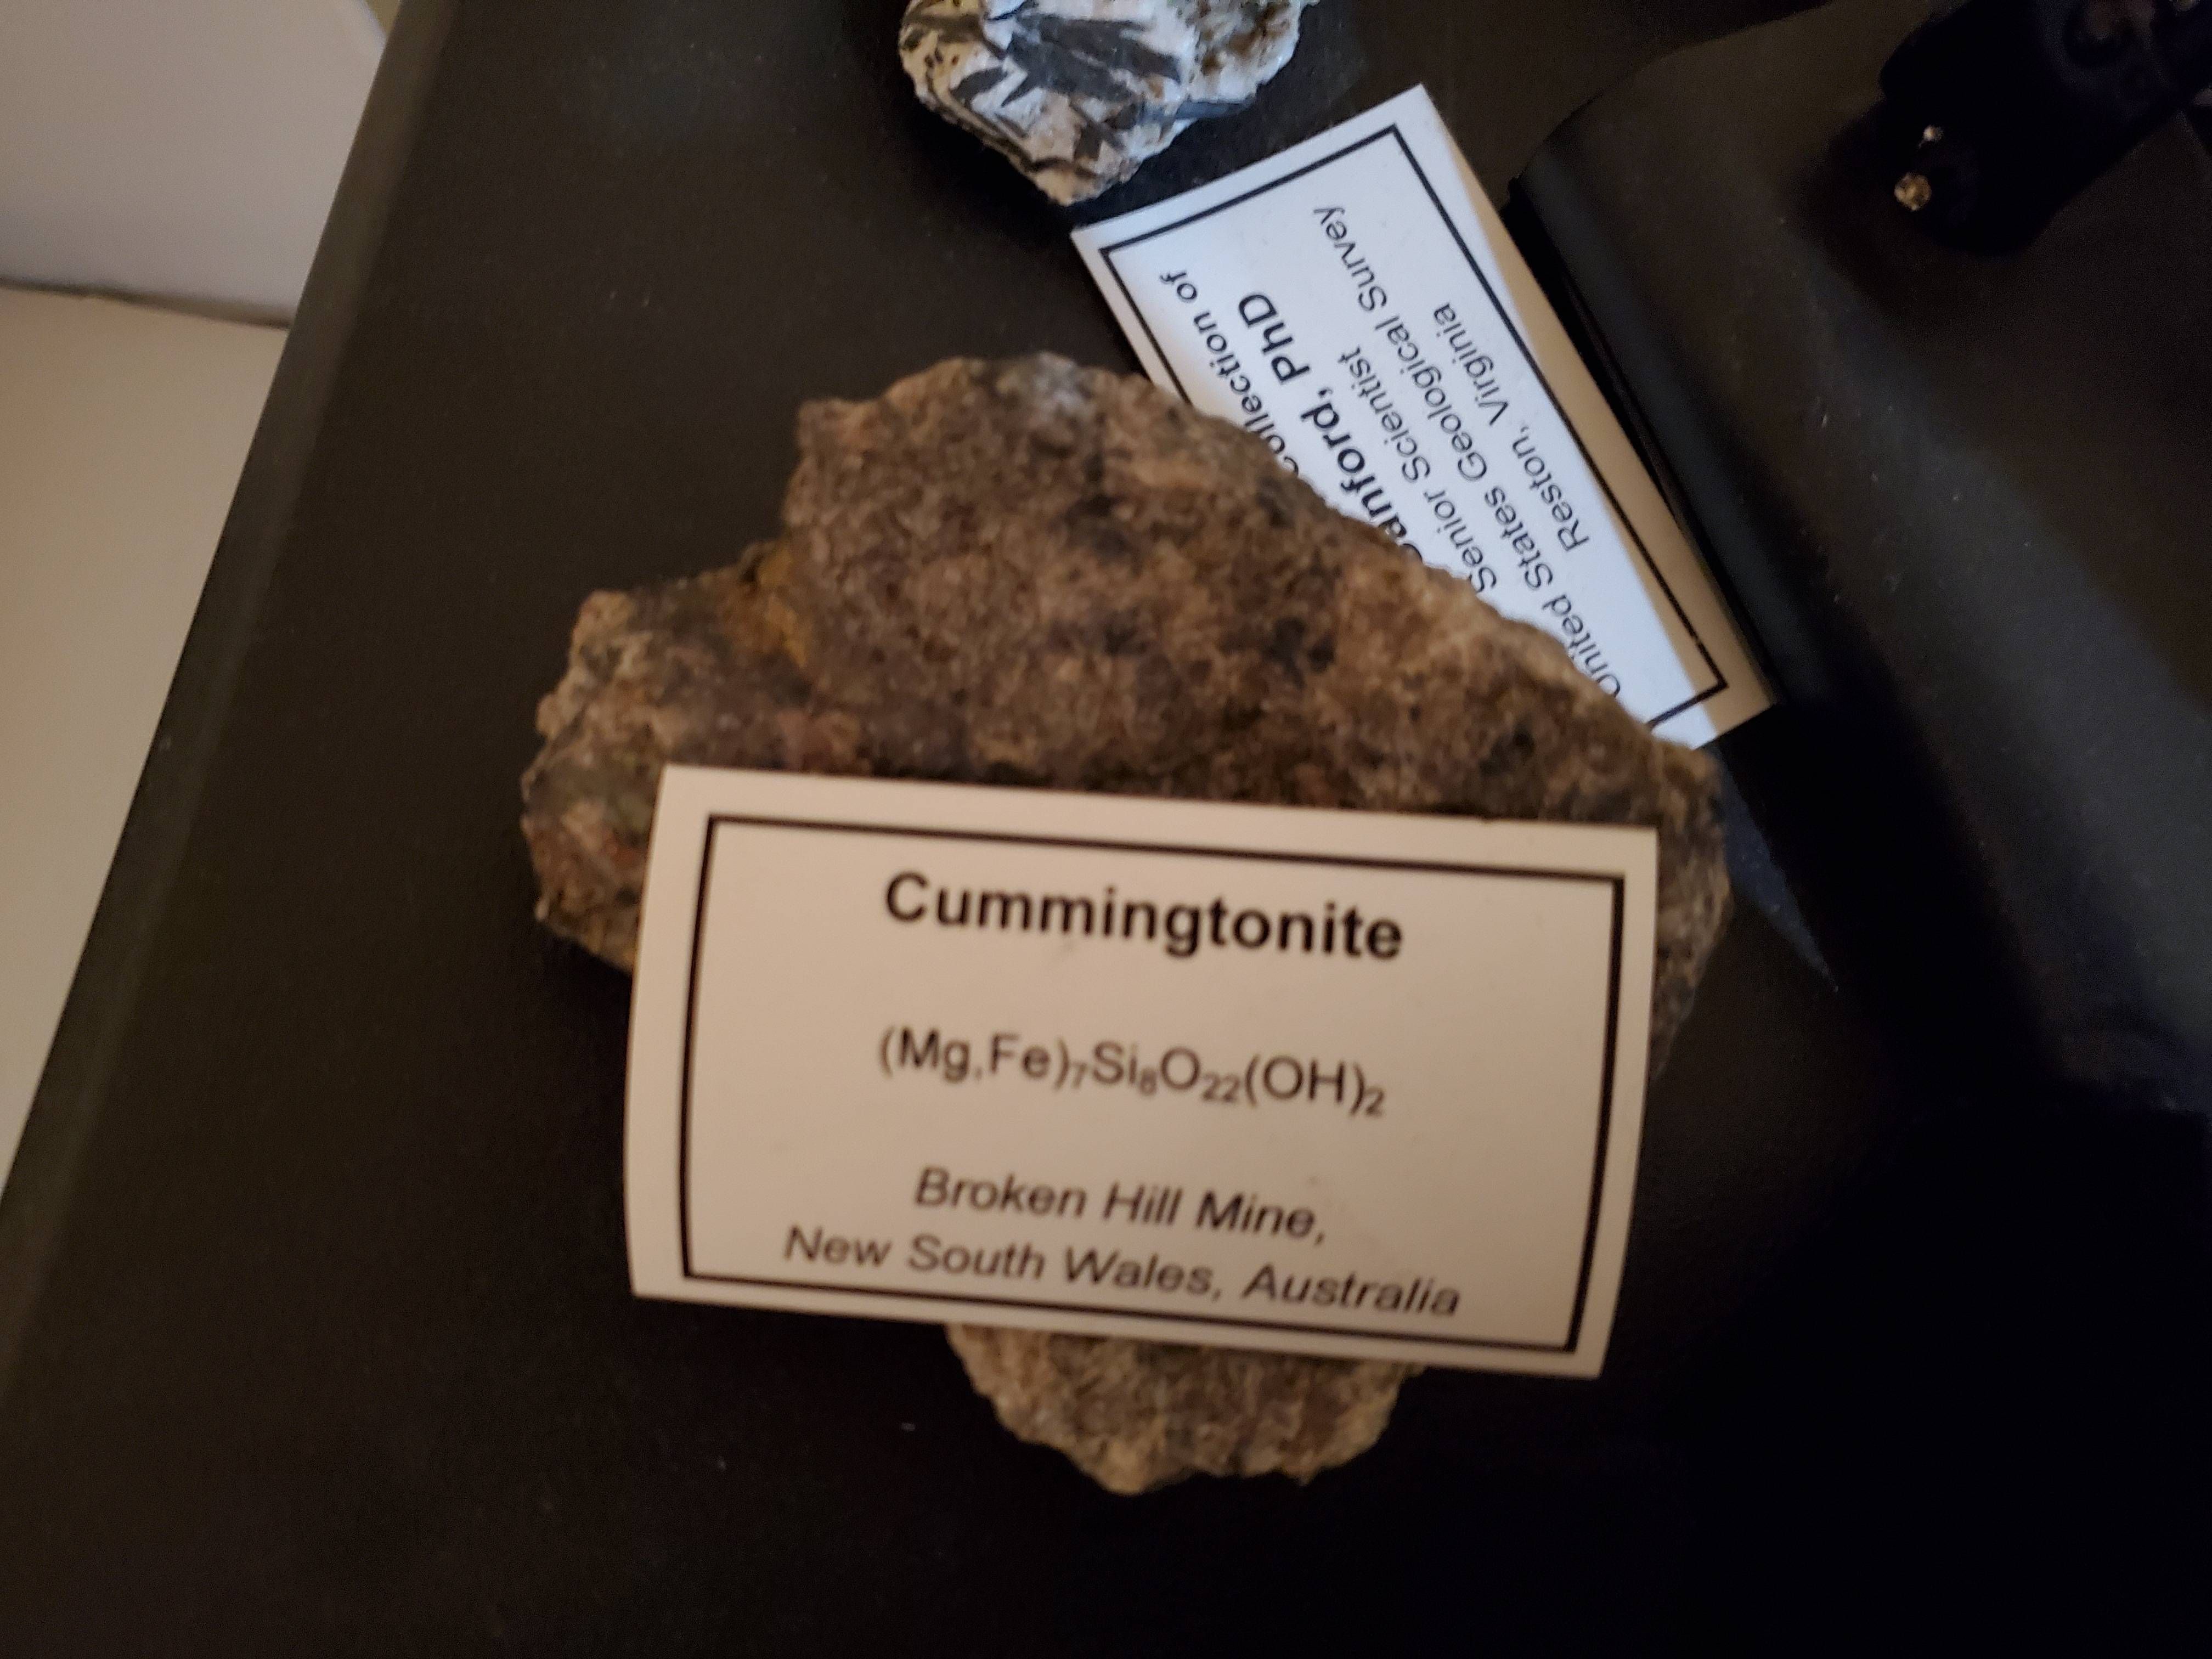 My dad's a hydrogeologist, this is probably my favorite mineral from his collection.